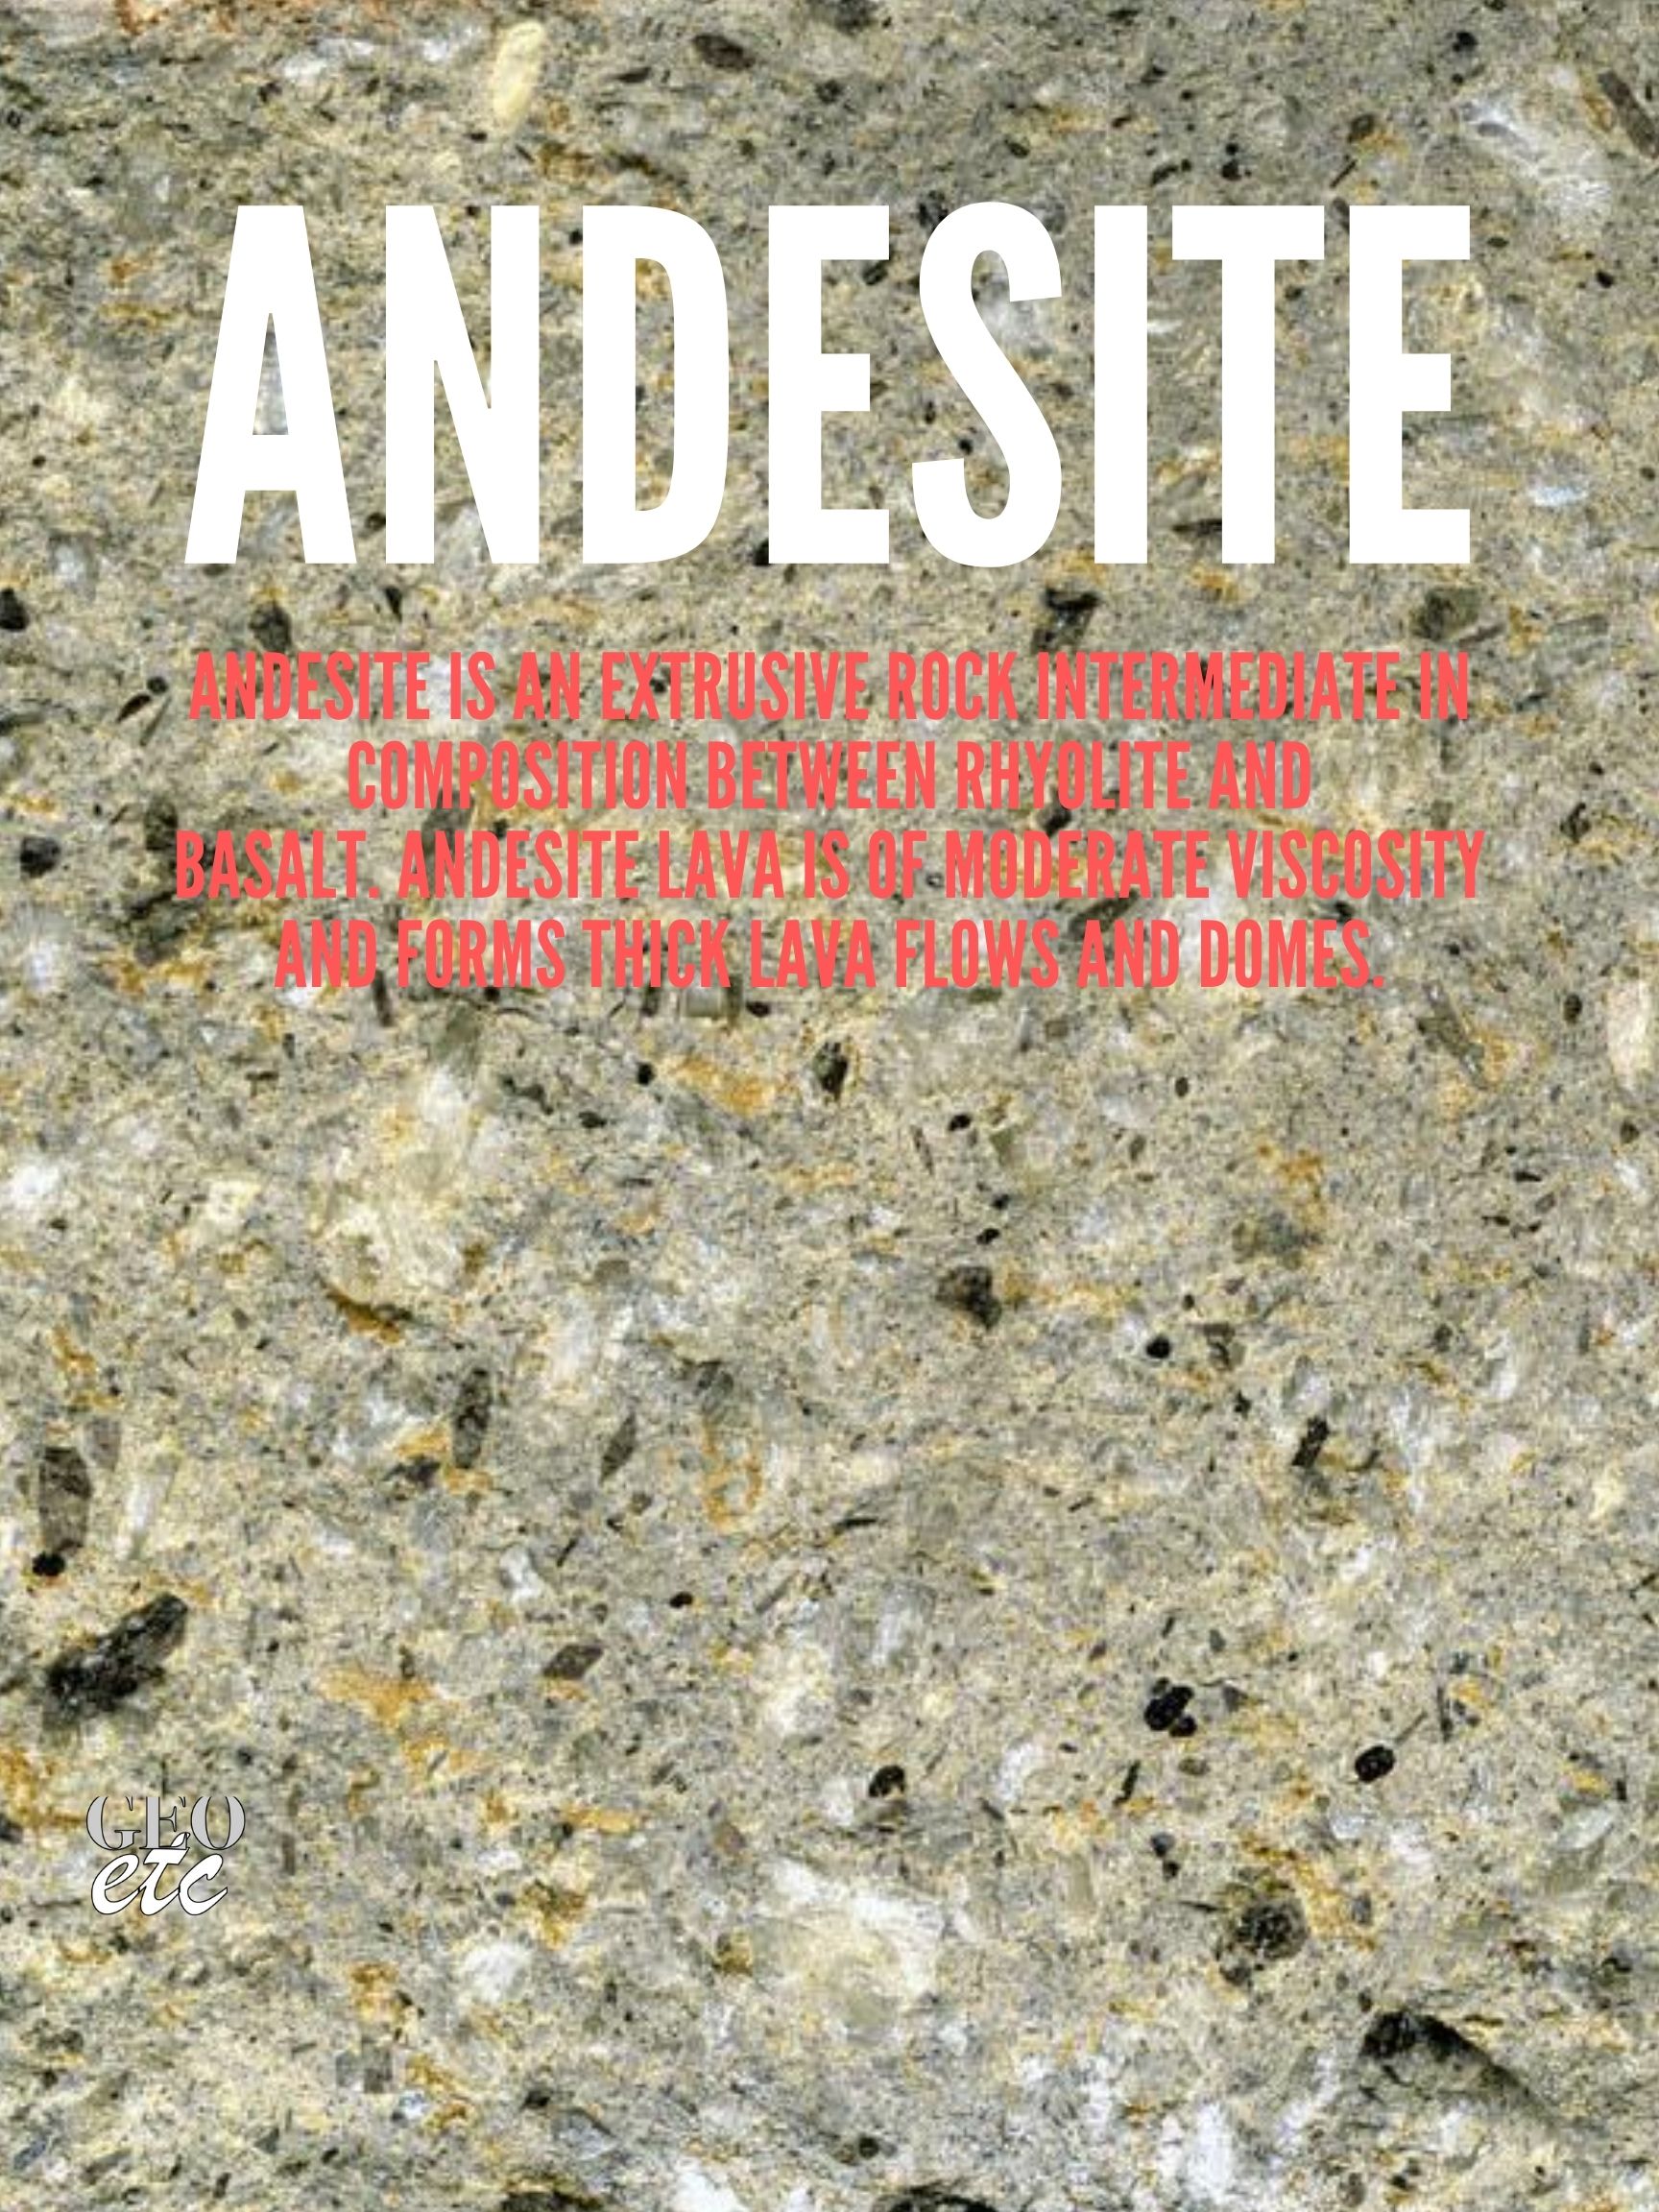 Andesite Poster